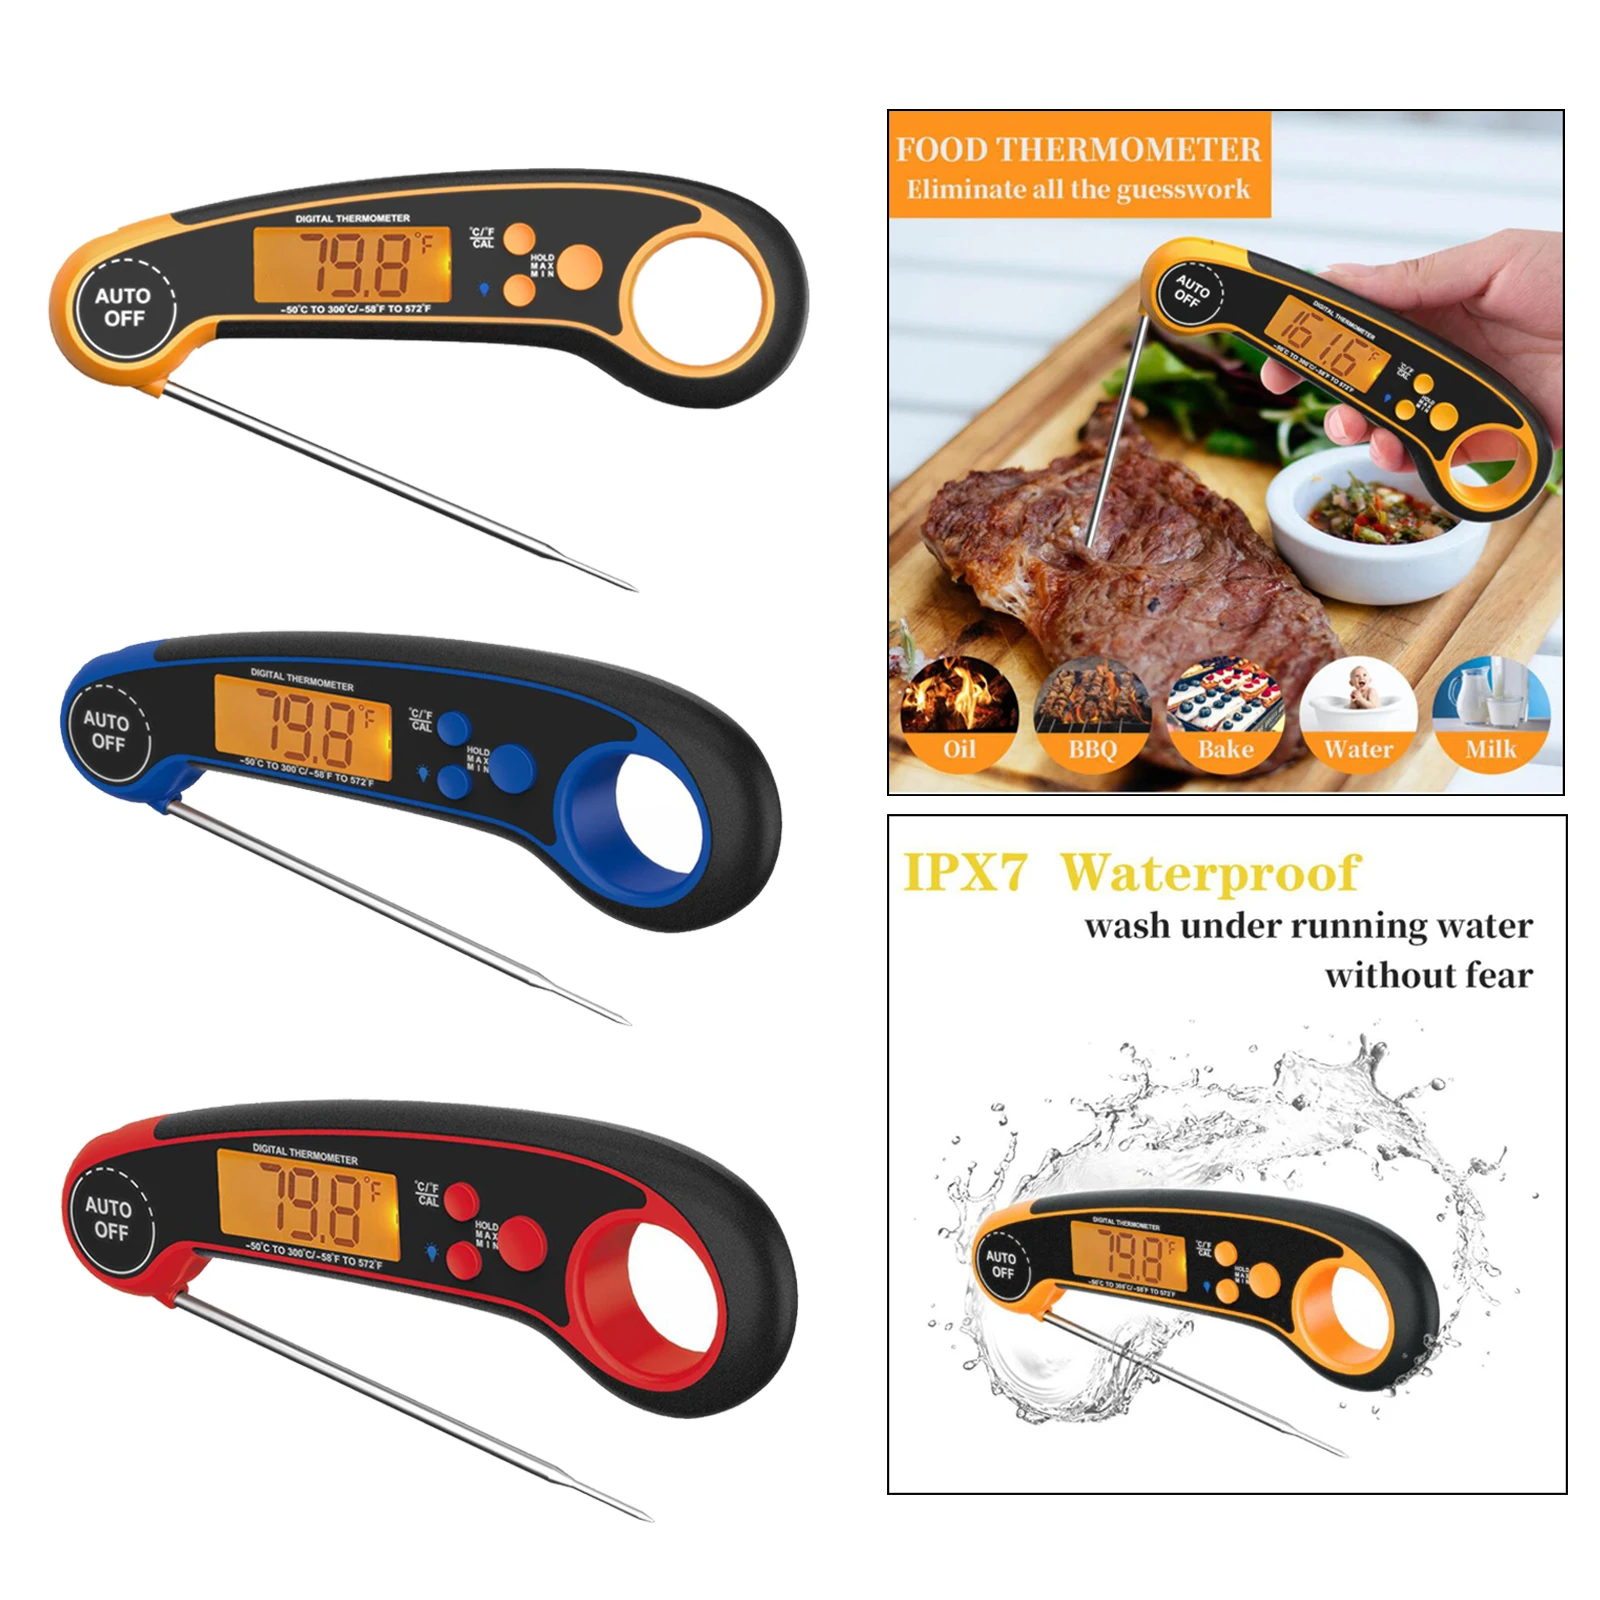 

Meat Food Thermometer for Grill and Cooking, Instant Read Waterproof Digital Kitchen Thermometer Probe for Grilling Smoker